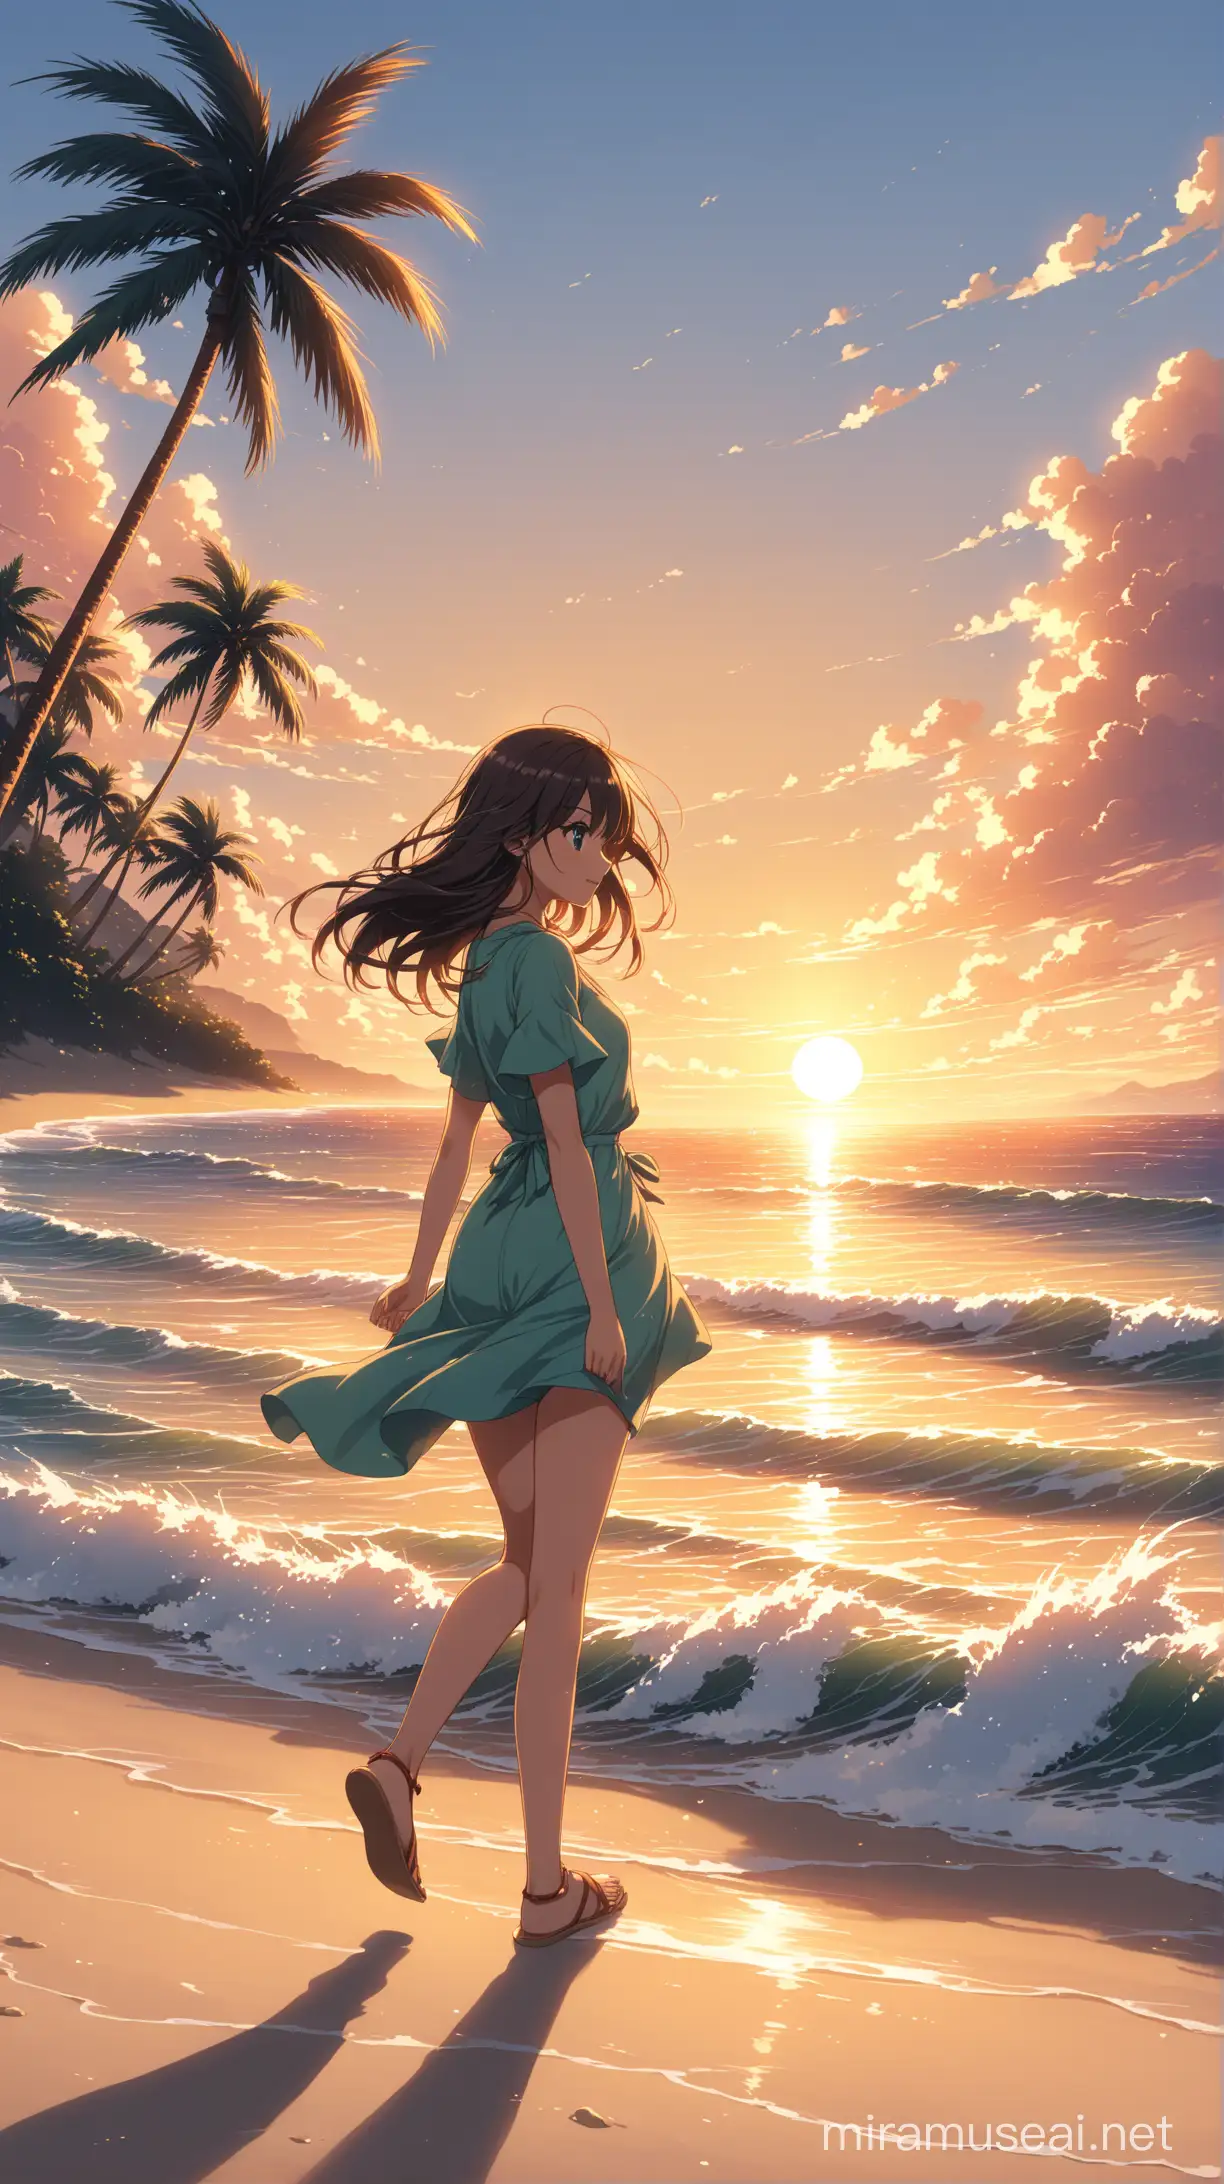 Tranquil Anime Girl Walking on Sunset Beach with Palm Trees